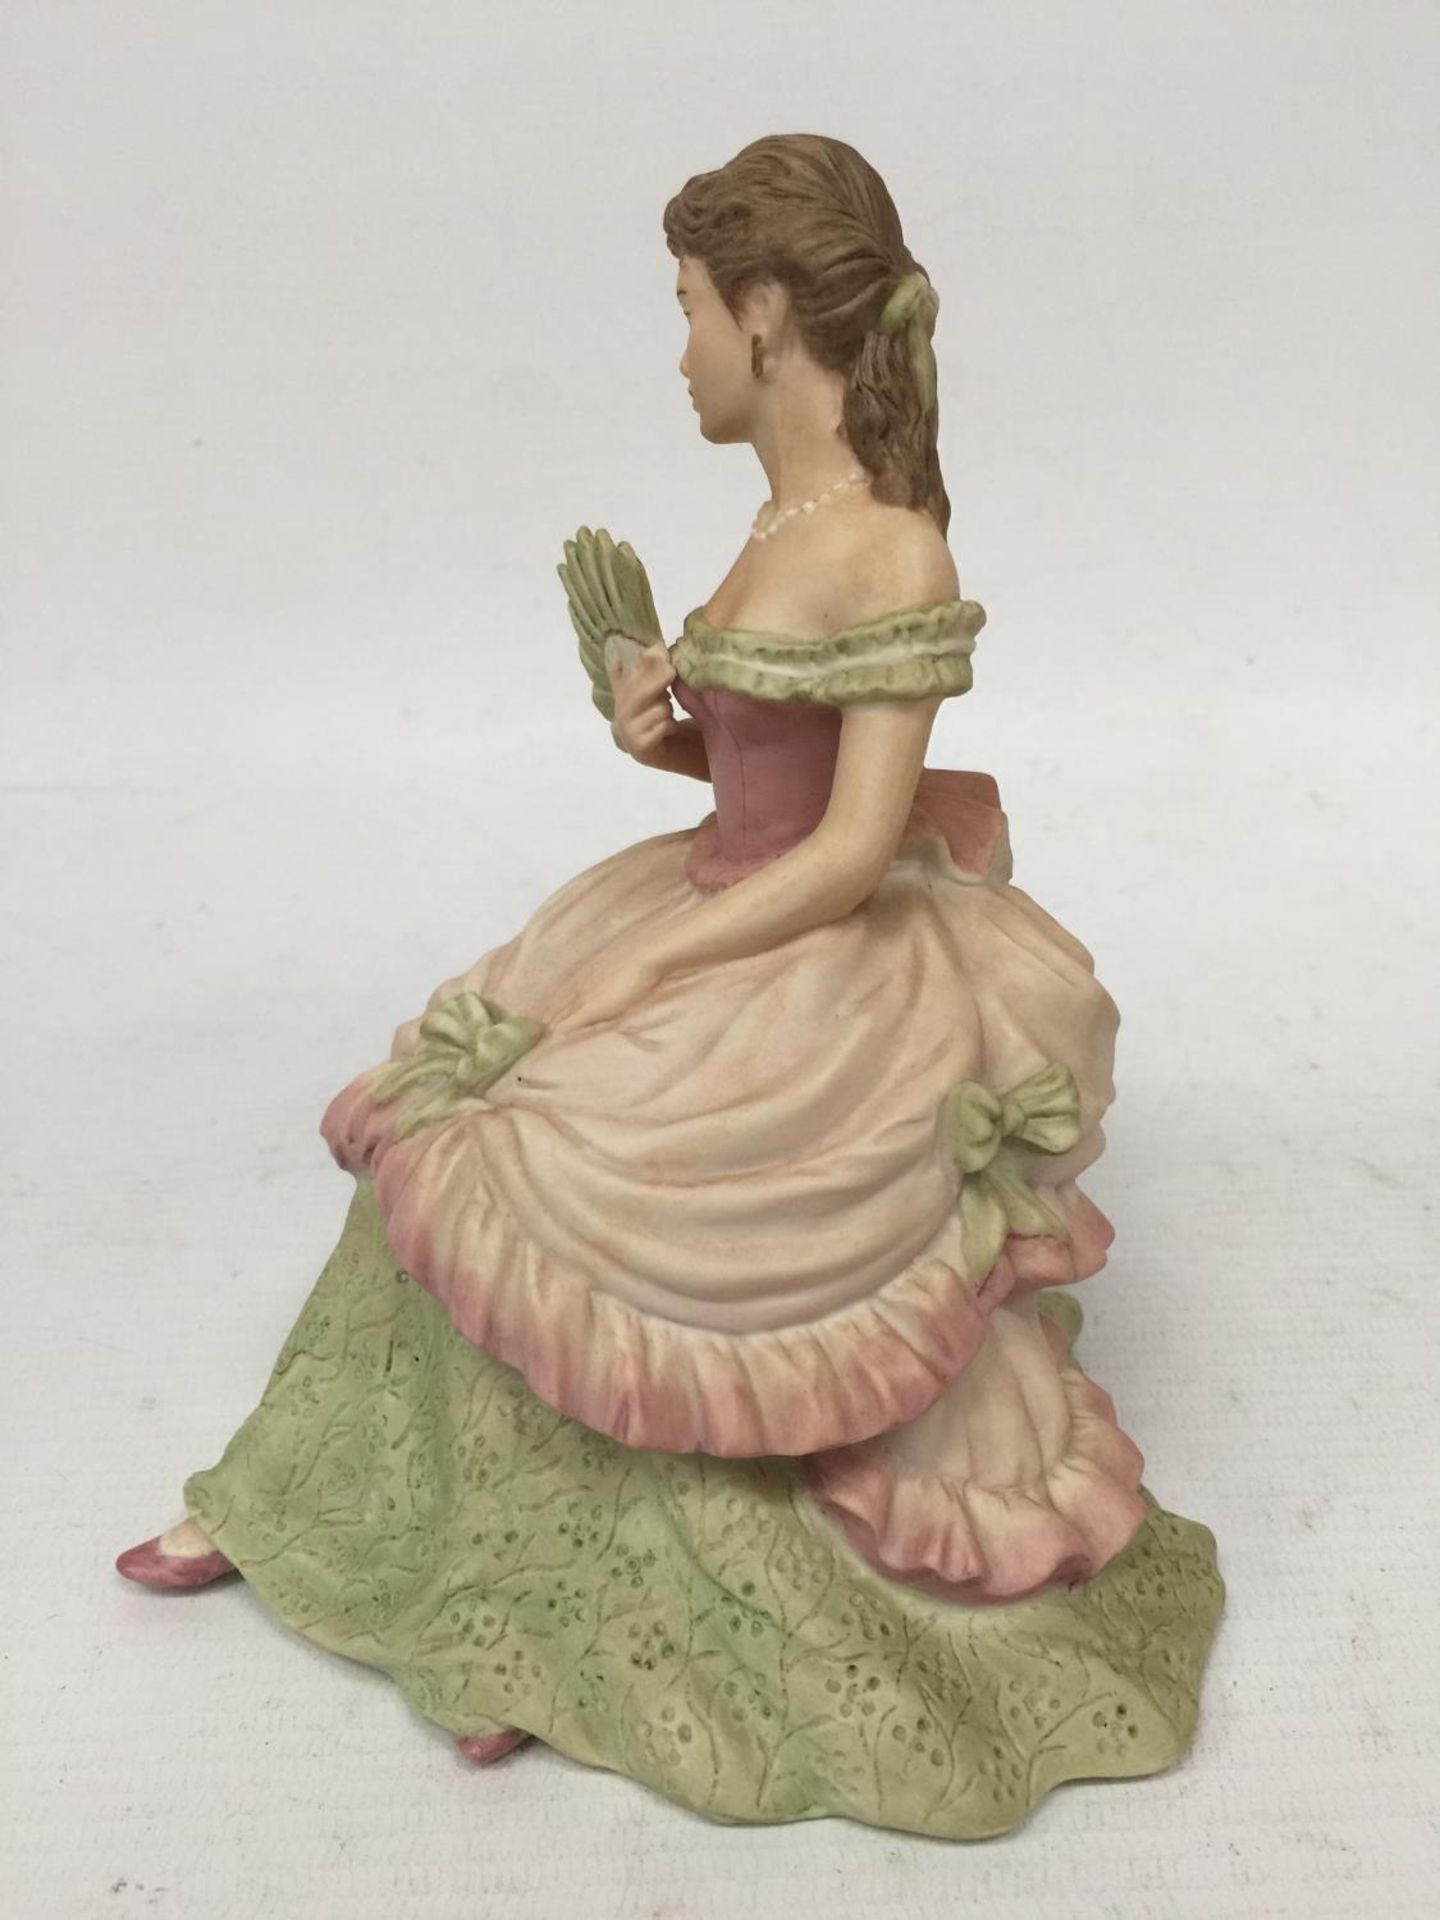 A COALPORT FIGURINE "INTERLUDE" FROM THE AGE OF ELEGANCE COLLECTION 1991 WITH A MATT FINISH - 17 CM - Image 4 of 5